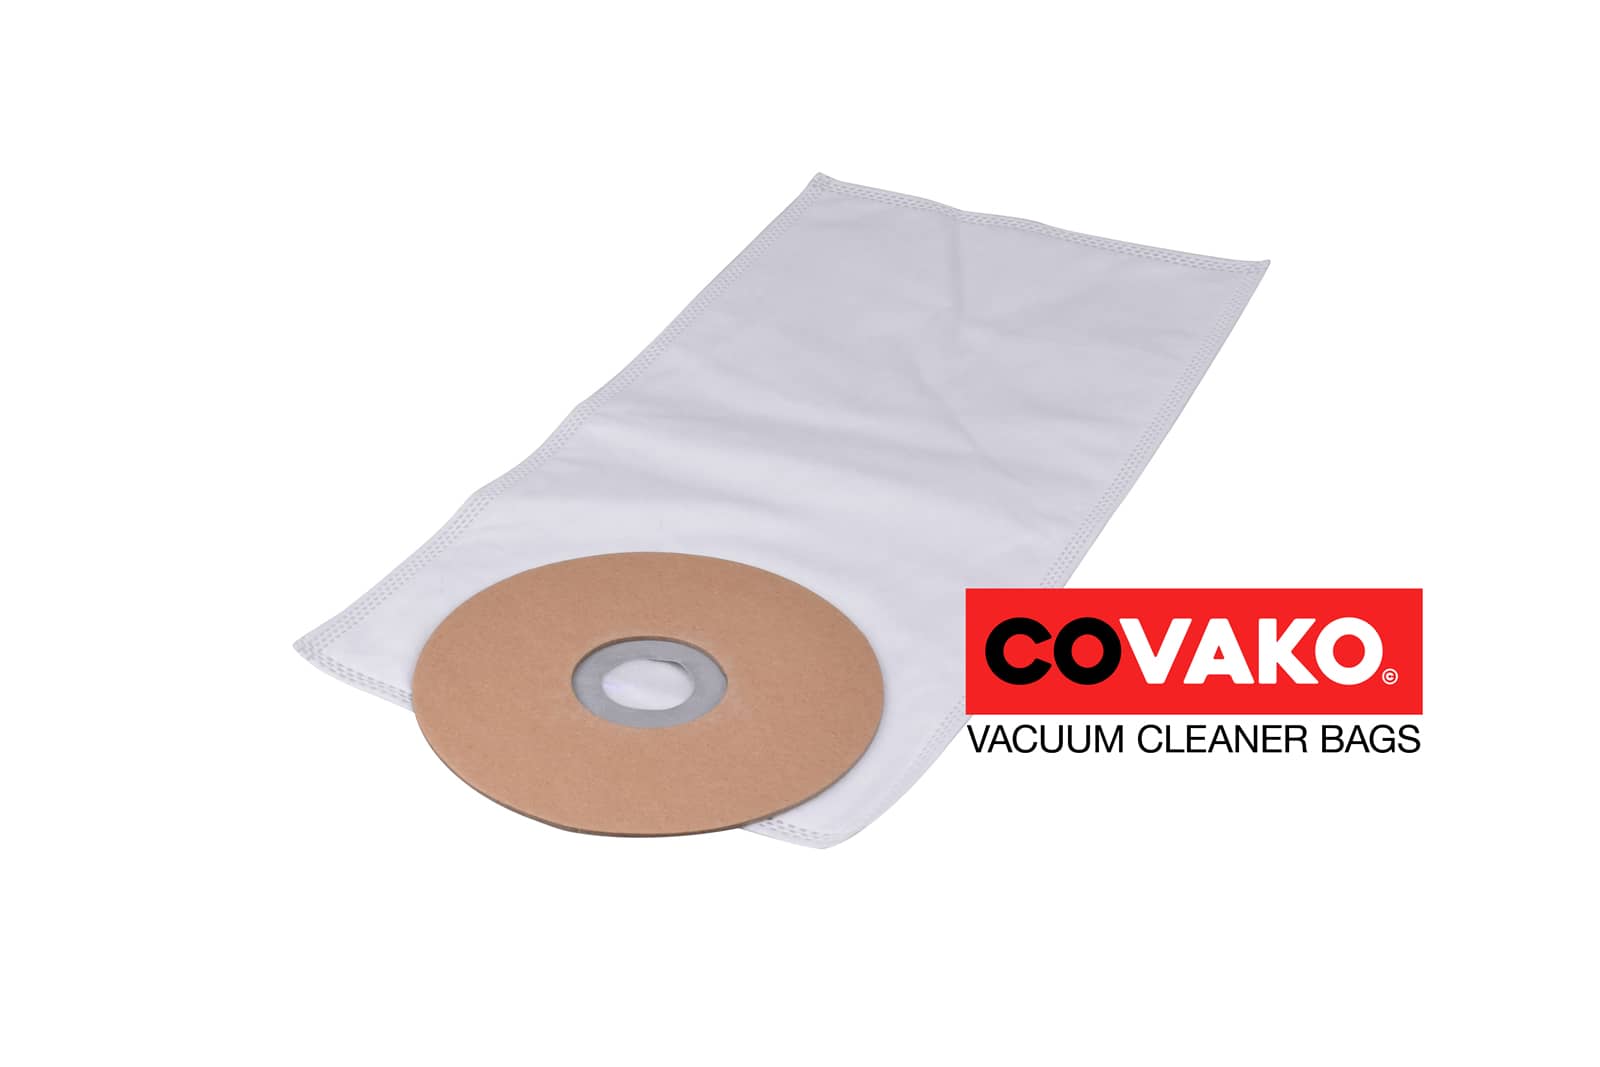 Fimap FV 9 Eco Energy / Synthesis - Fimap vacuum cleaner bags